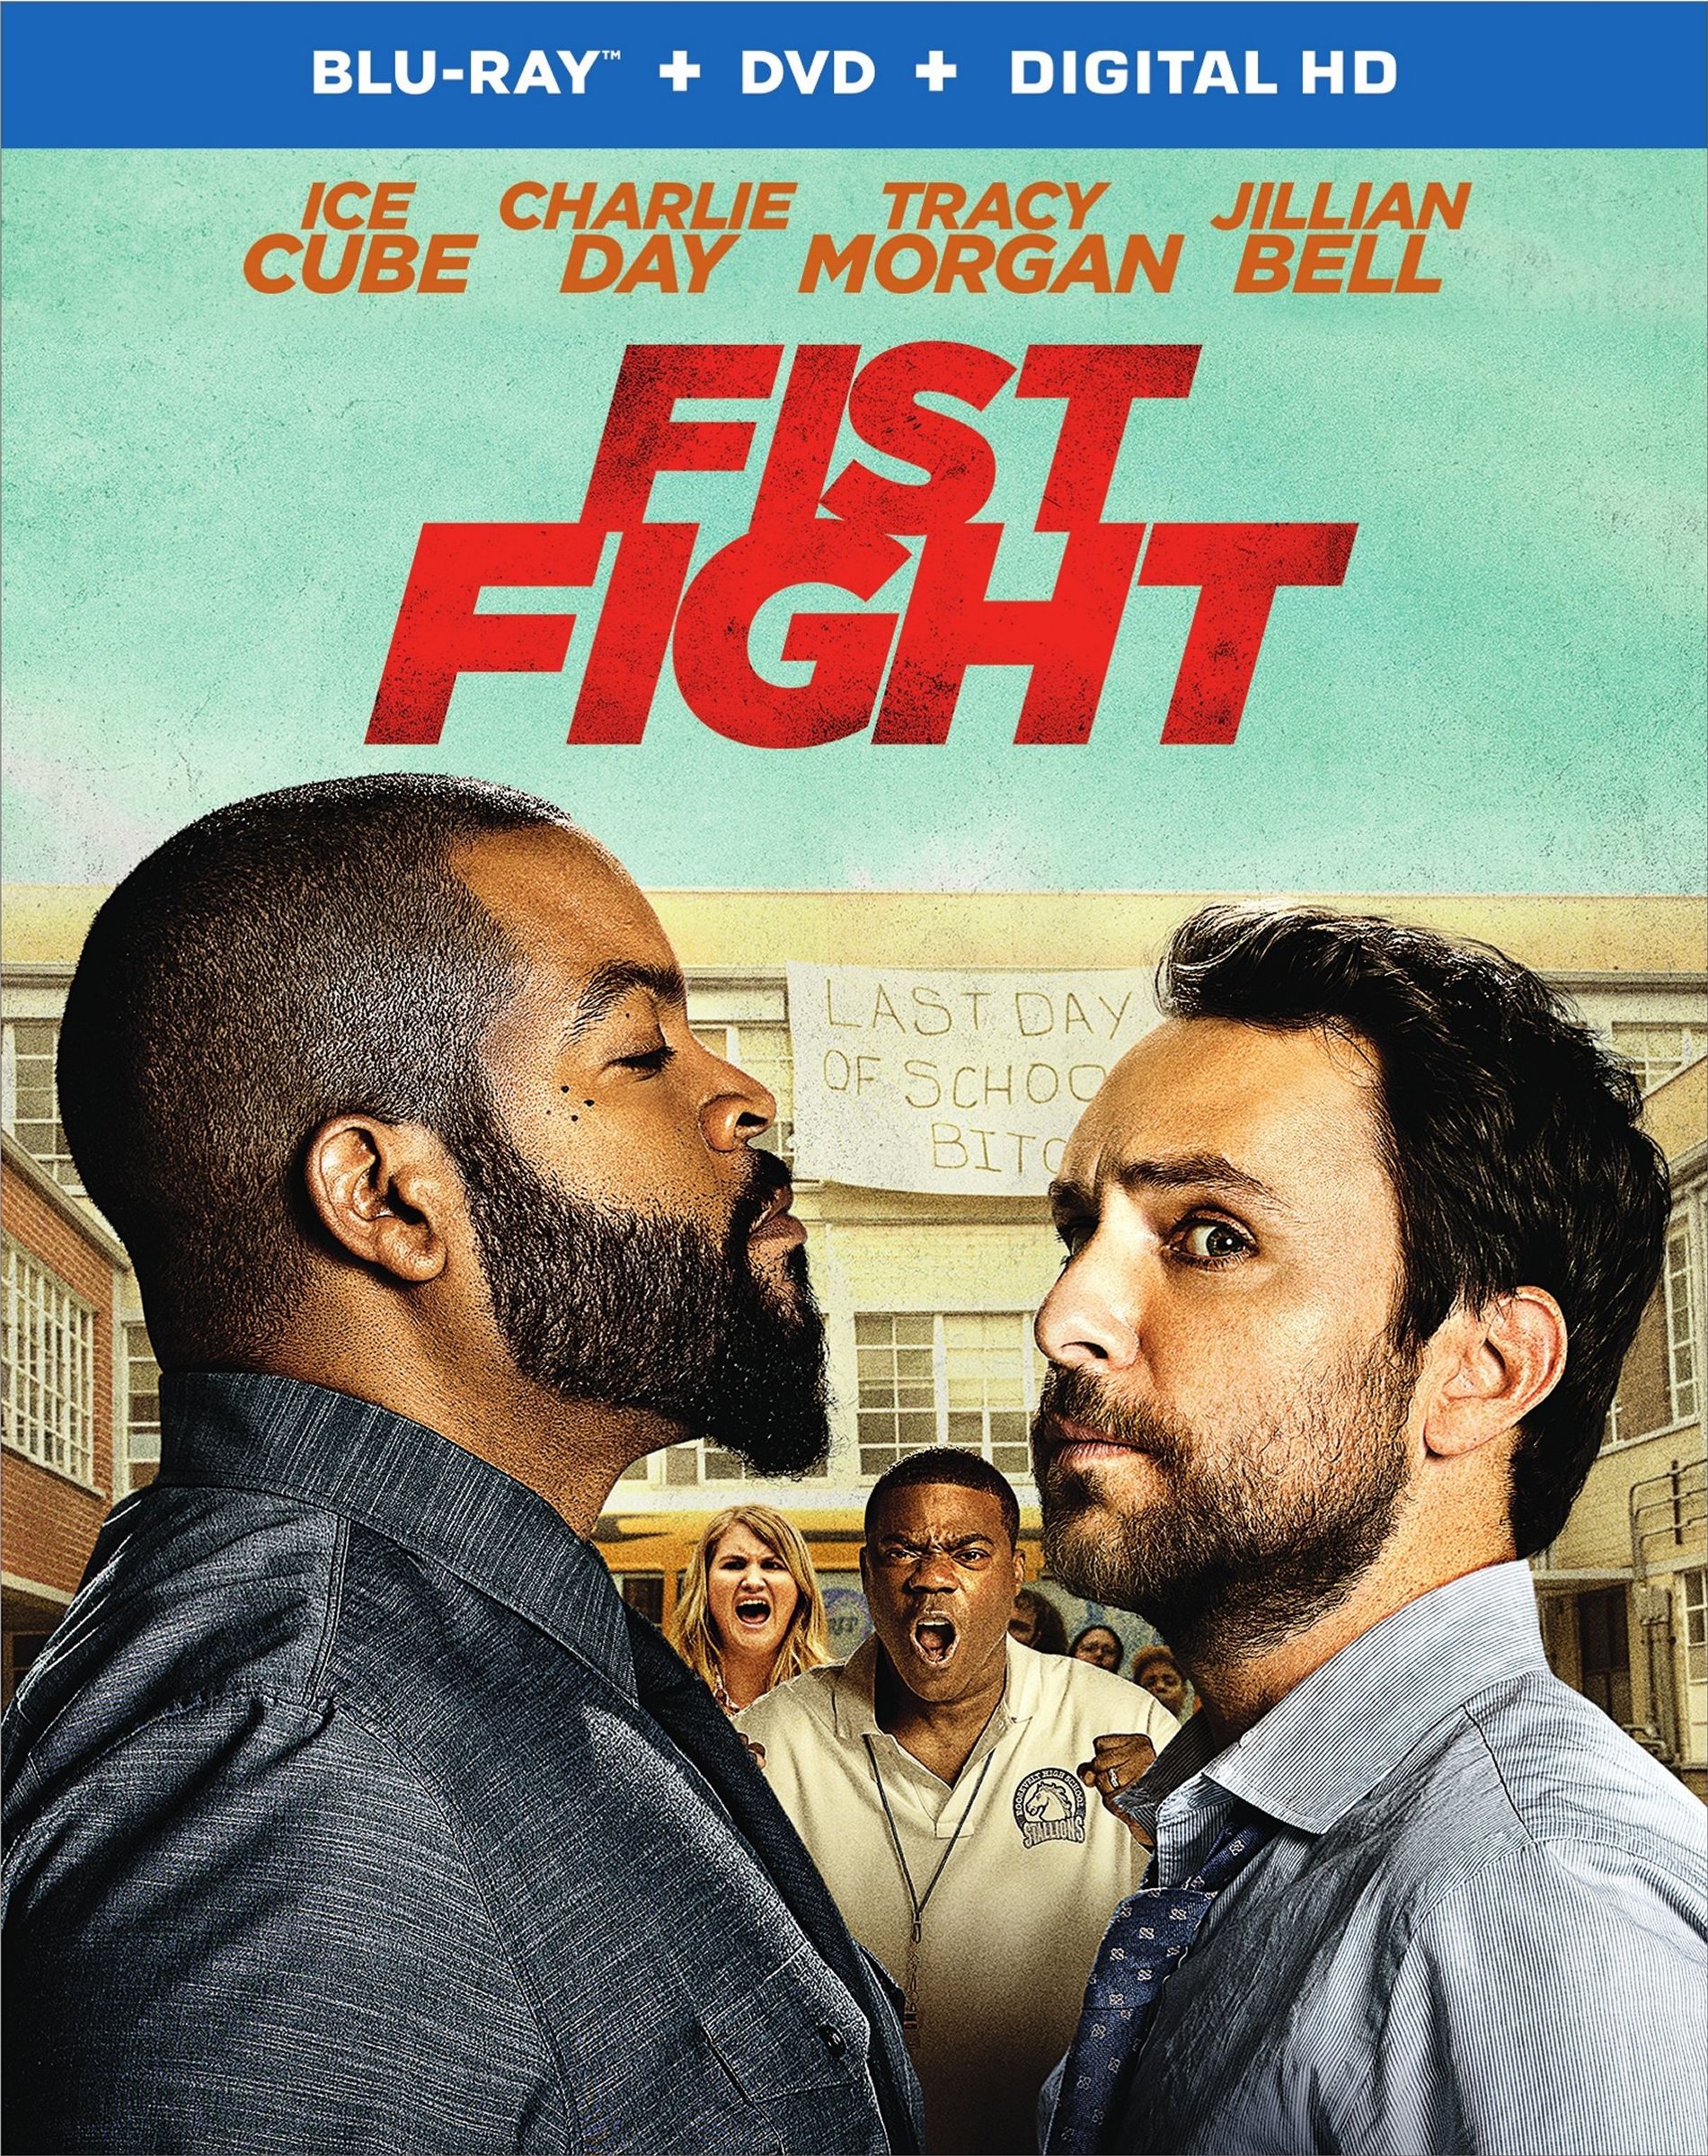 Fist Fight DVD Release Date May 30, 2017